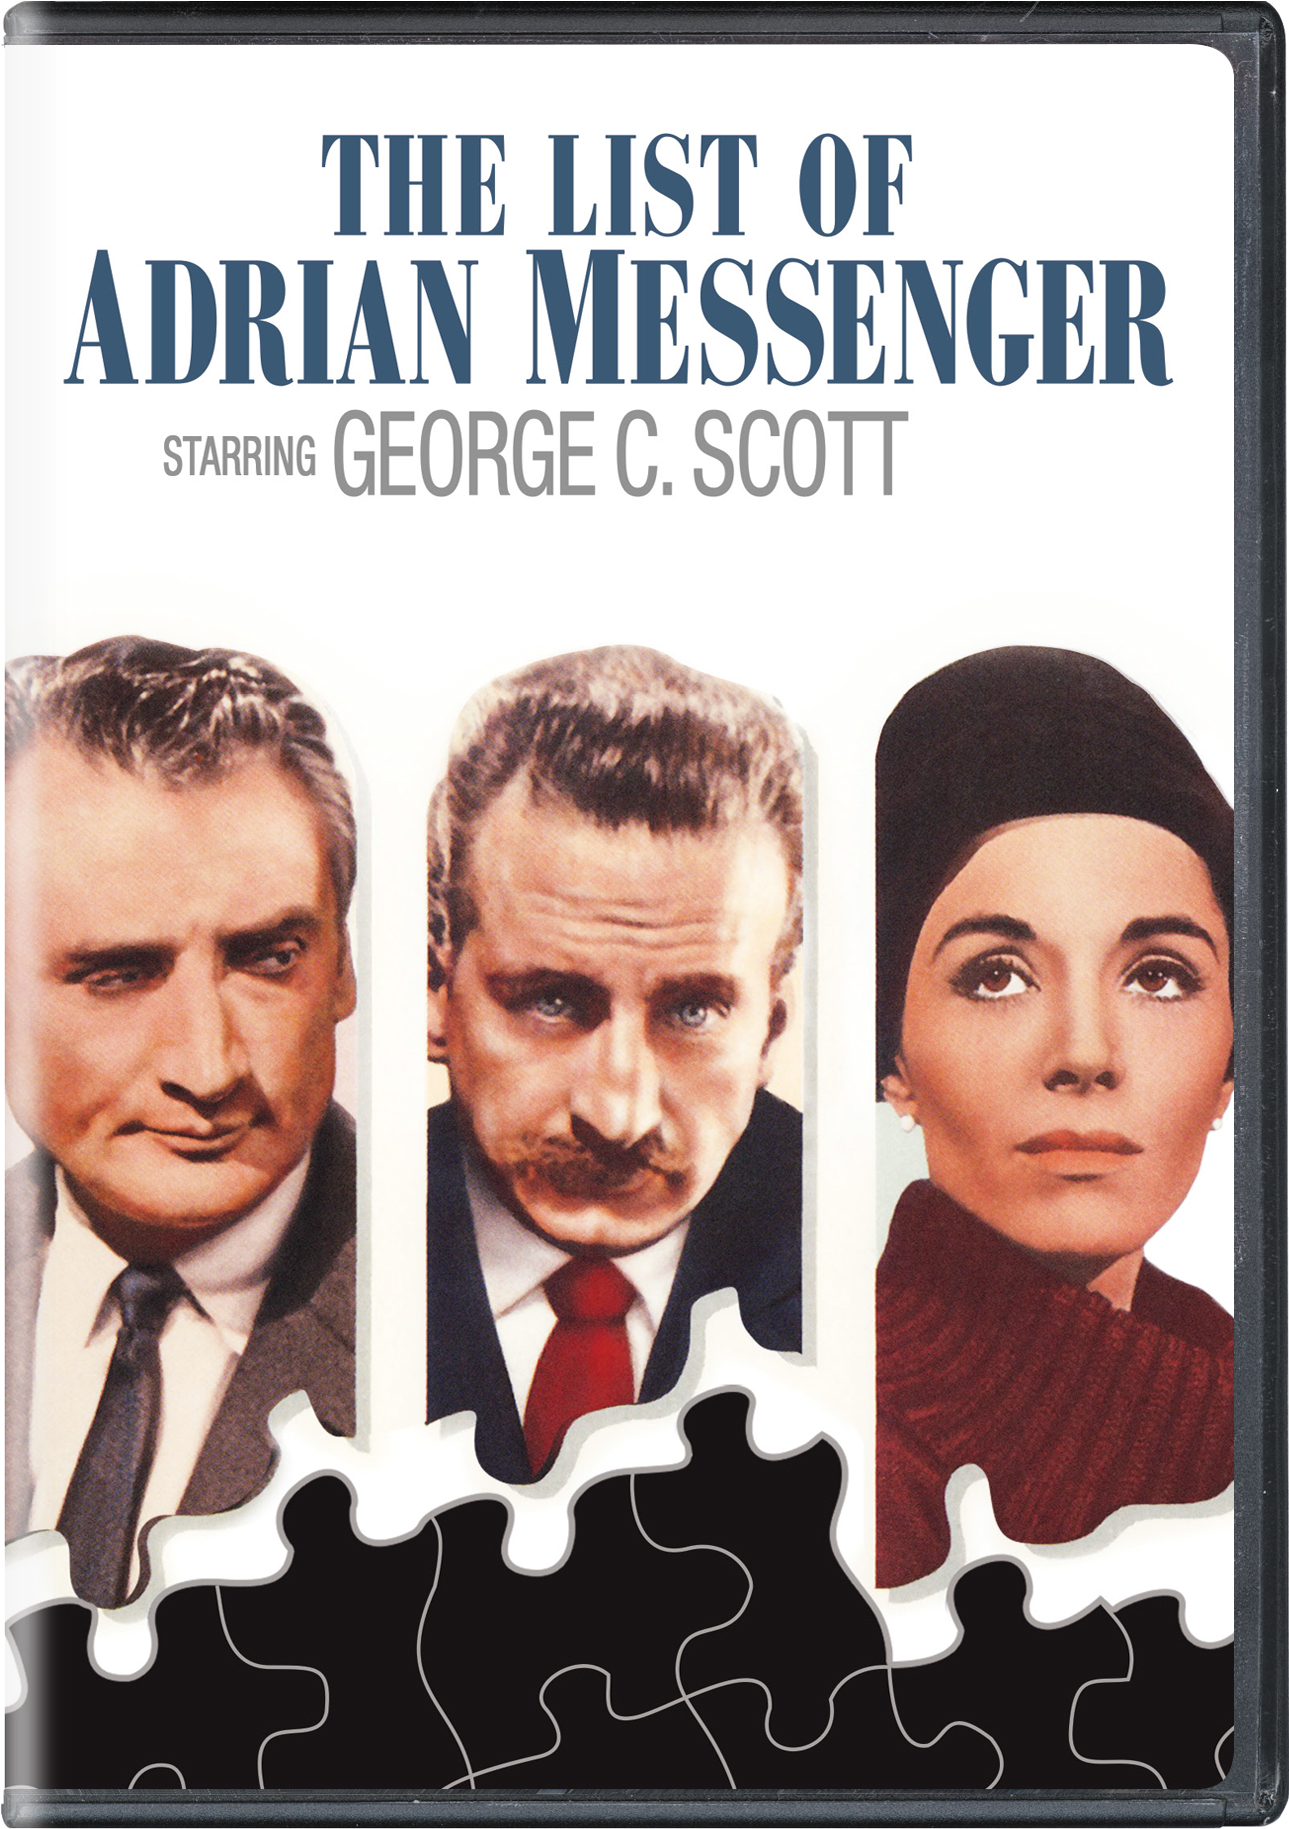 The List Of Adrian Messenger - DVD [ 1963 ]  - Modern Classic Movies On DVD - Movies On GRUV